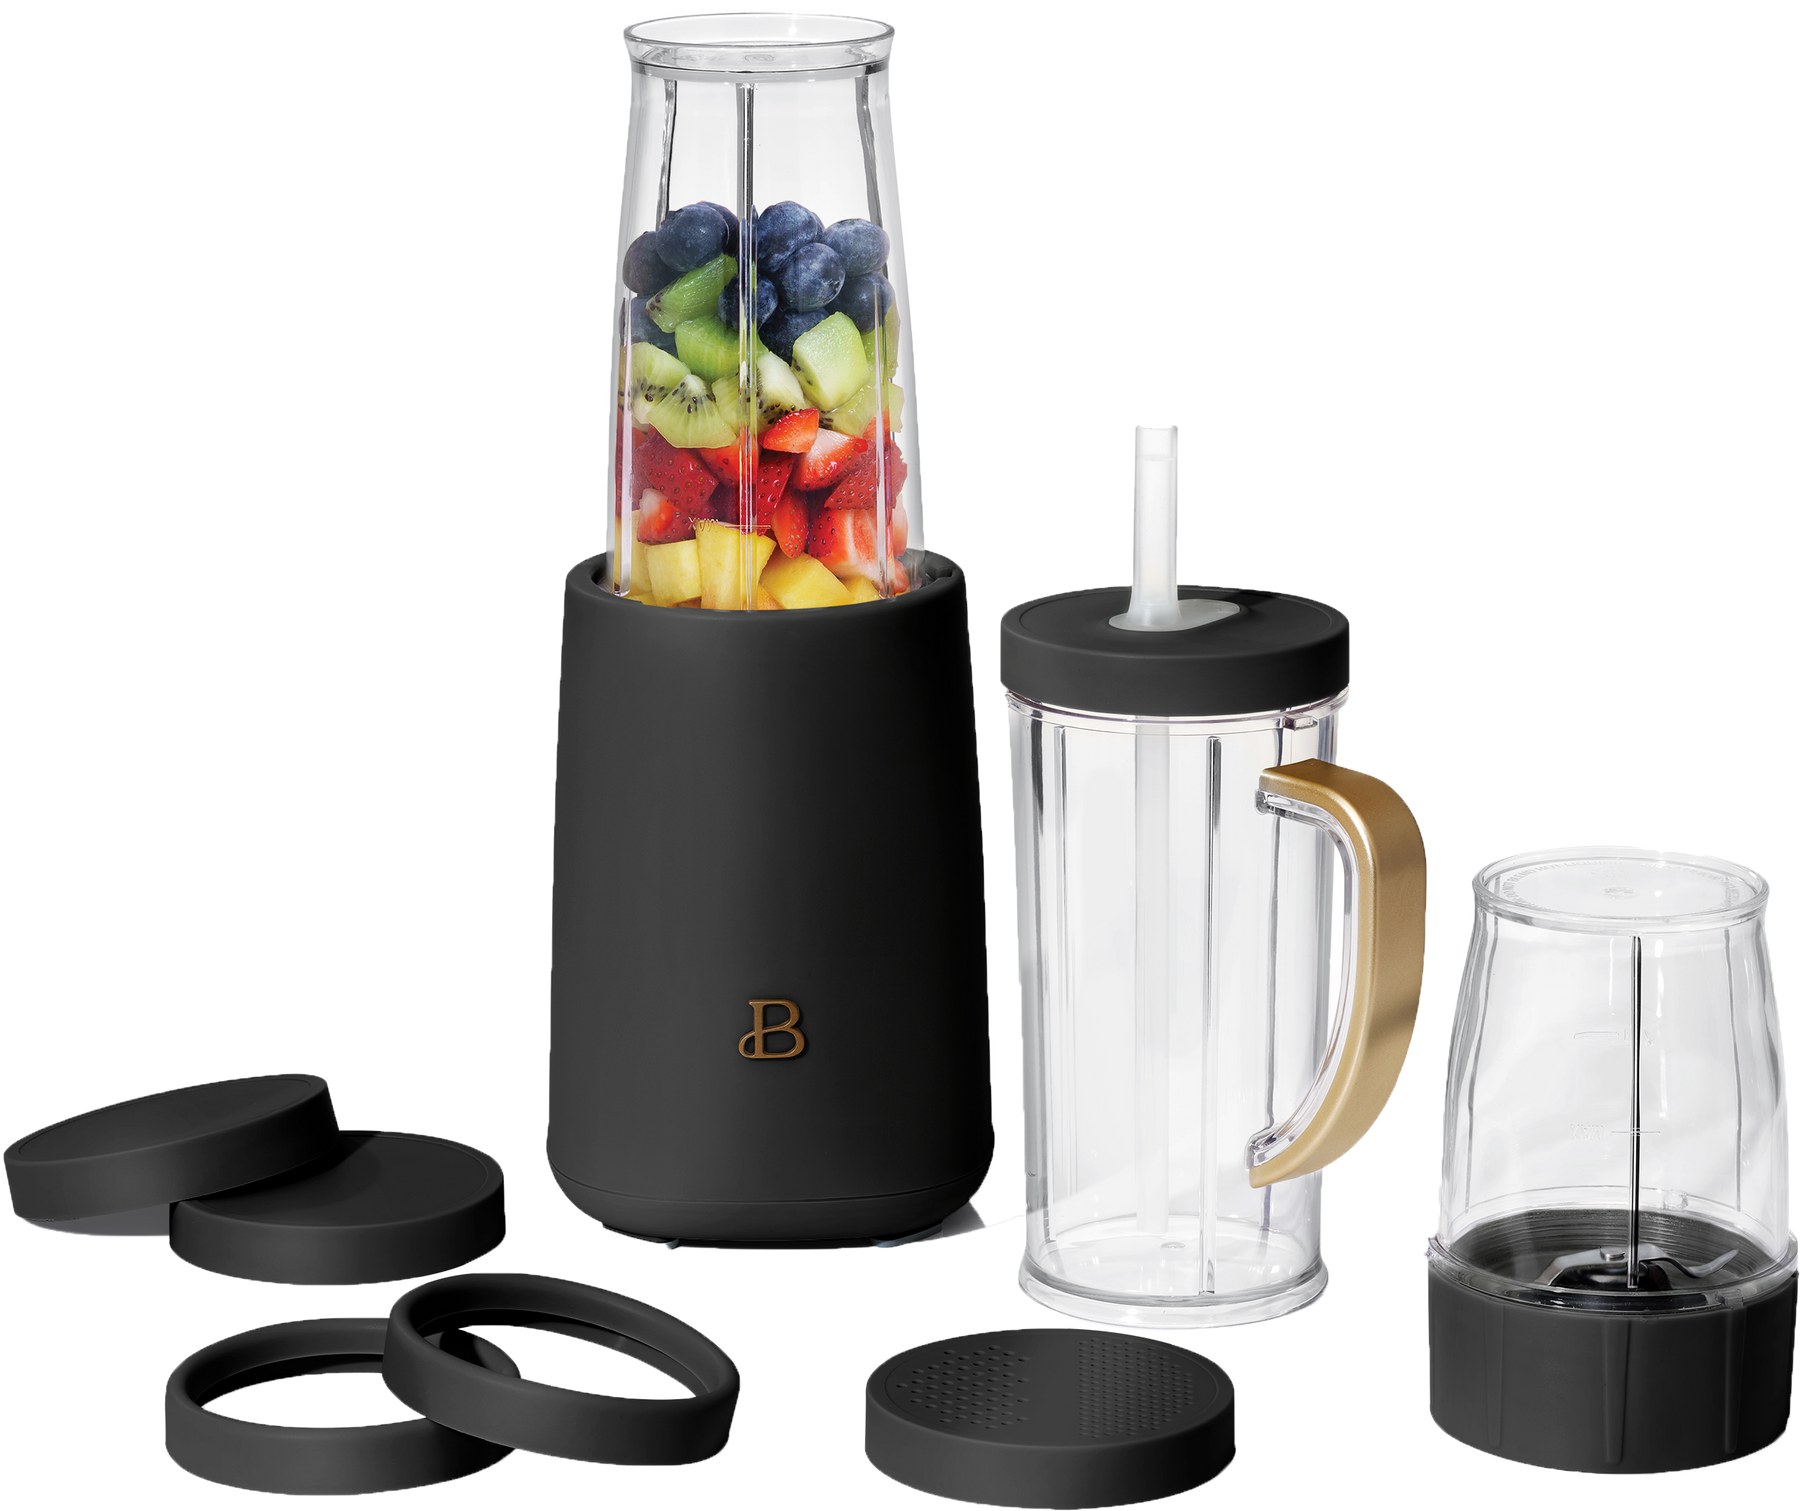 Beautiful Portable To-Go Blender 2.0, 70 W, 16 oz, Oyster Grey by Drew Barrymore